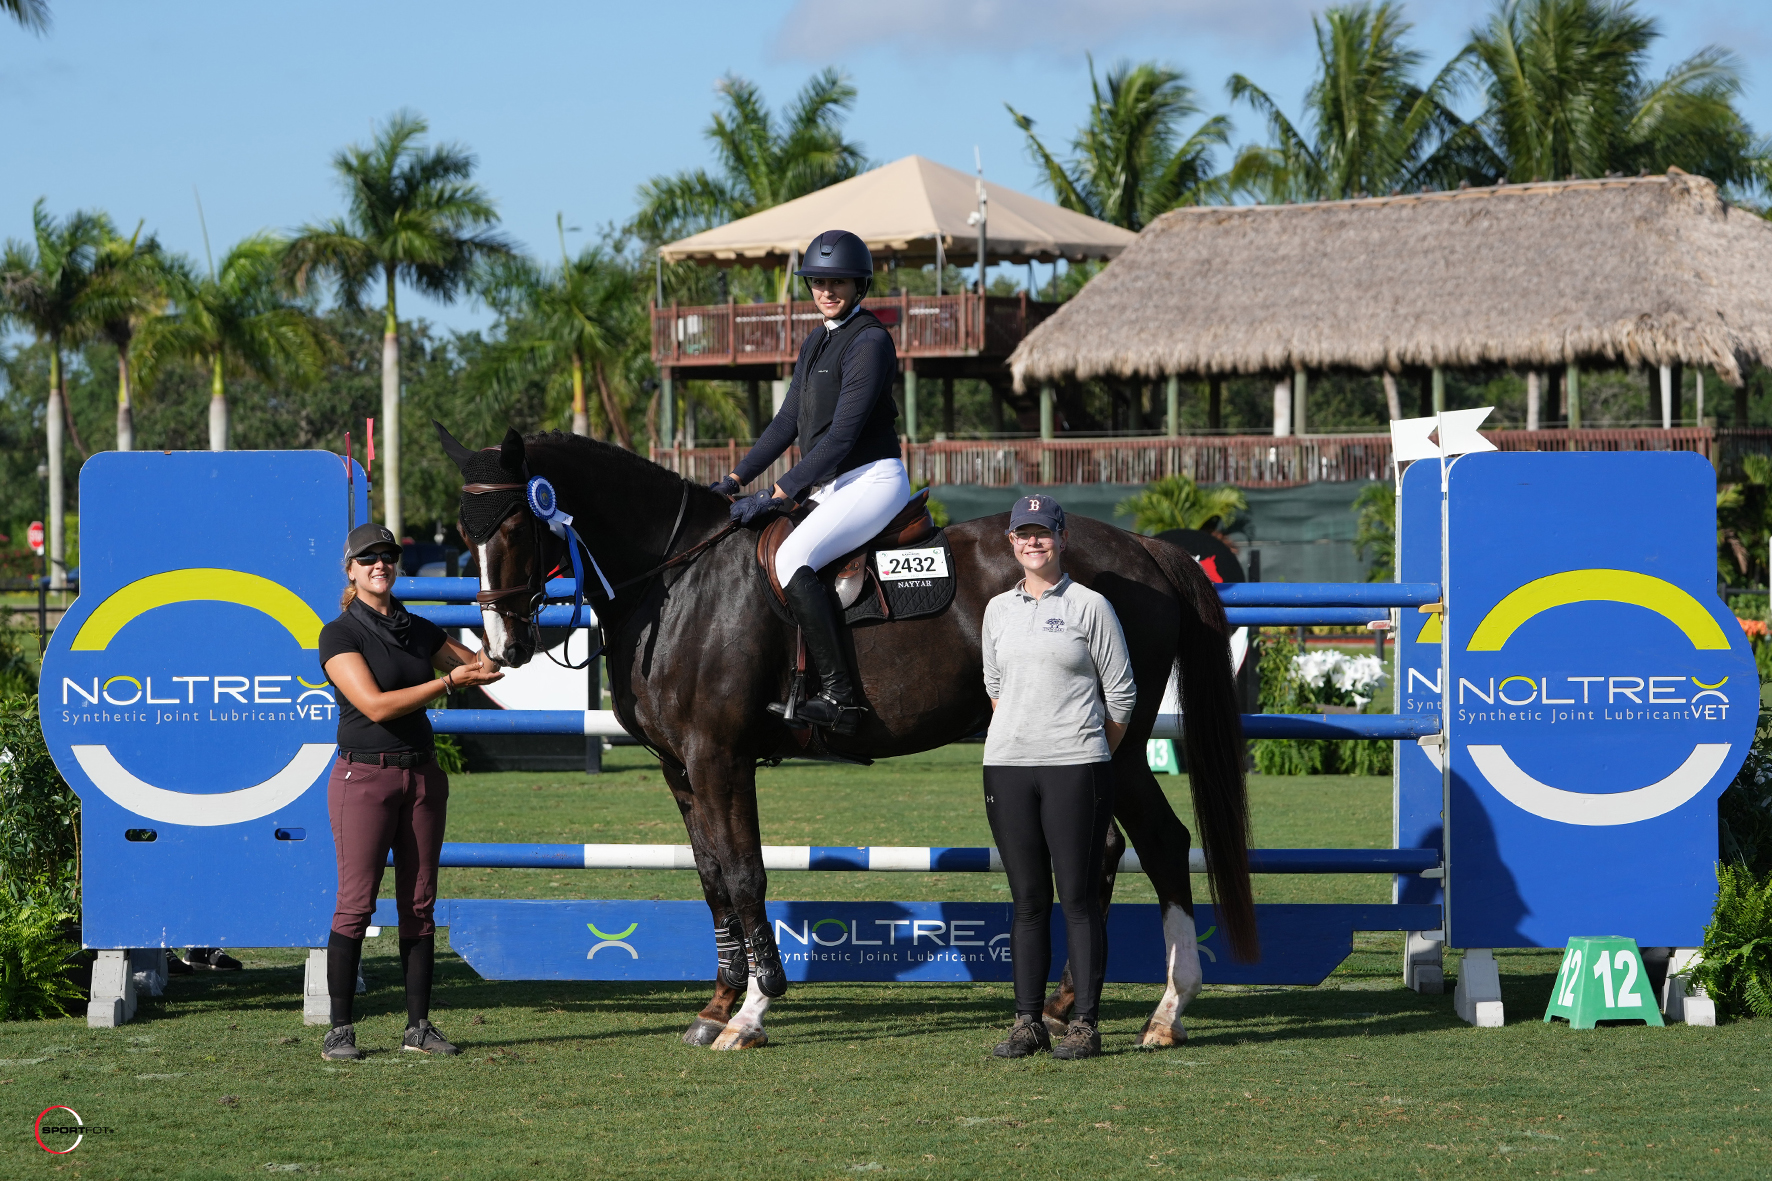 Maya Nayyar and Vertige De Vigneul won the  $2,500 High Amateur/Junior Jumper Classic, presented by Noltrex® Vet. Pictured with Morgan Kennedy  and Arianna Kimball. ©Sportfot